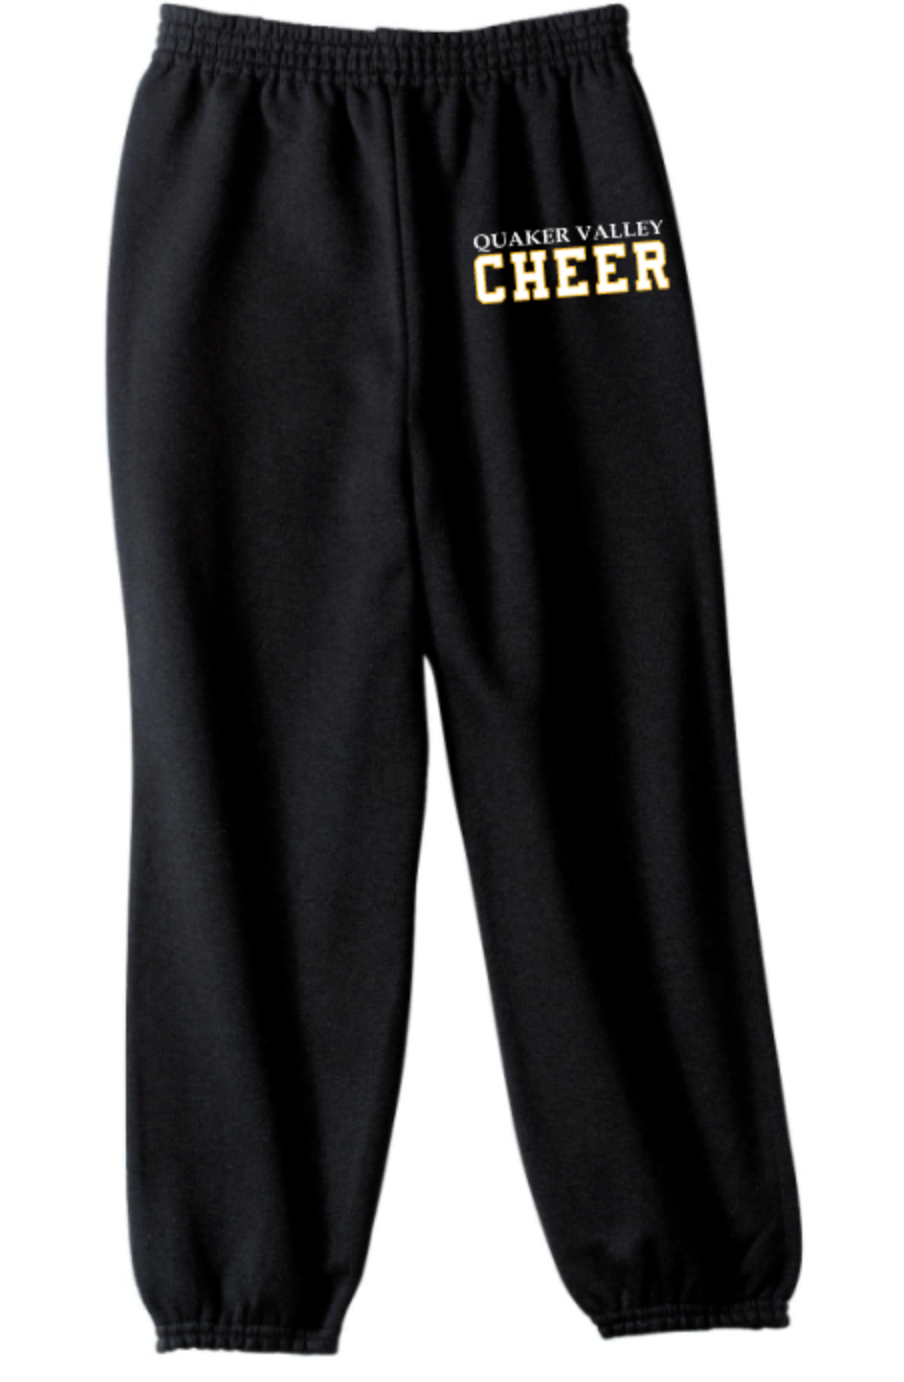 QUAKER VALLEY CHEER YOUTH & ADULT CORE FLEECE ELASTIC BOTTOM SWEATPANTS WITH POCKETS